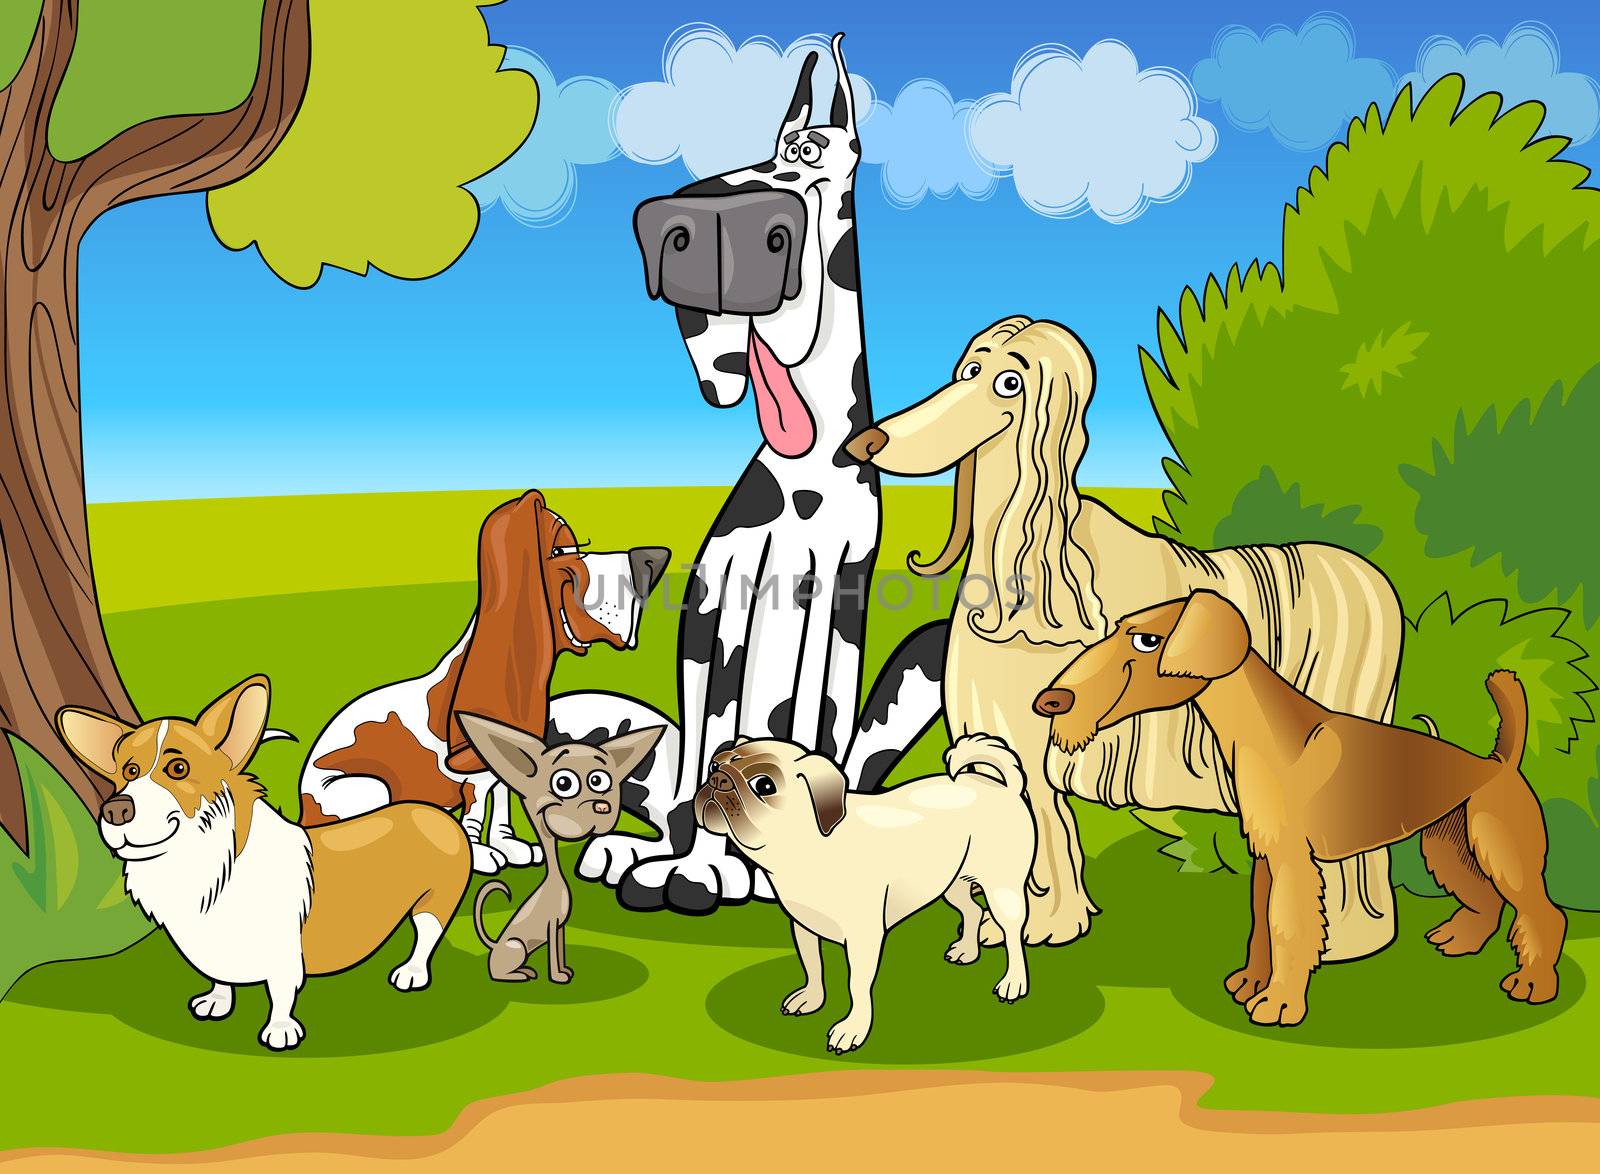 Cartoon Illustration of Cute Purebred Dogs or Puppies Group against Rural Scene with Blue Sky